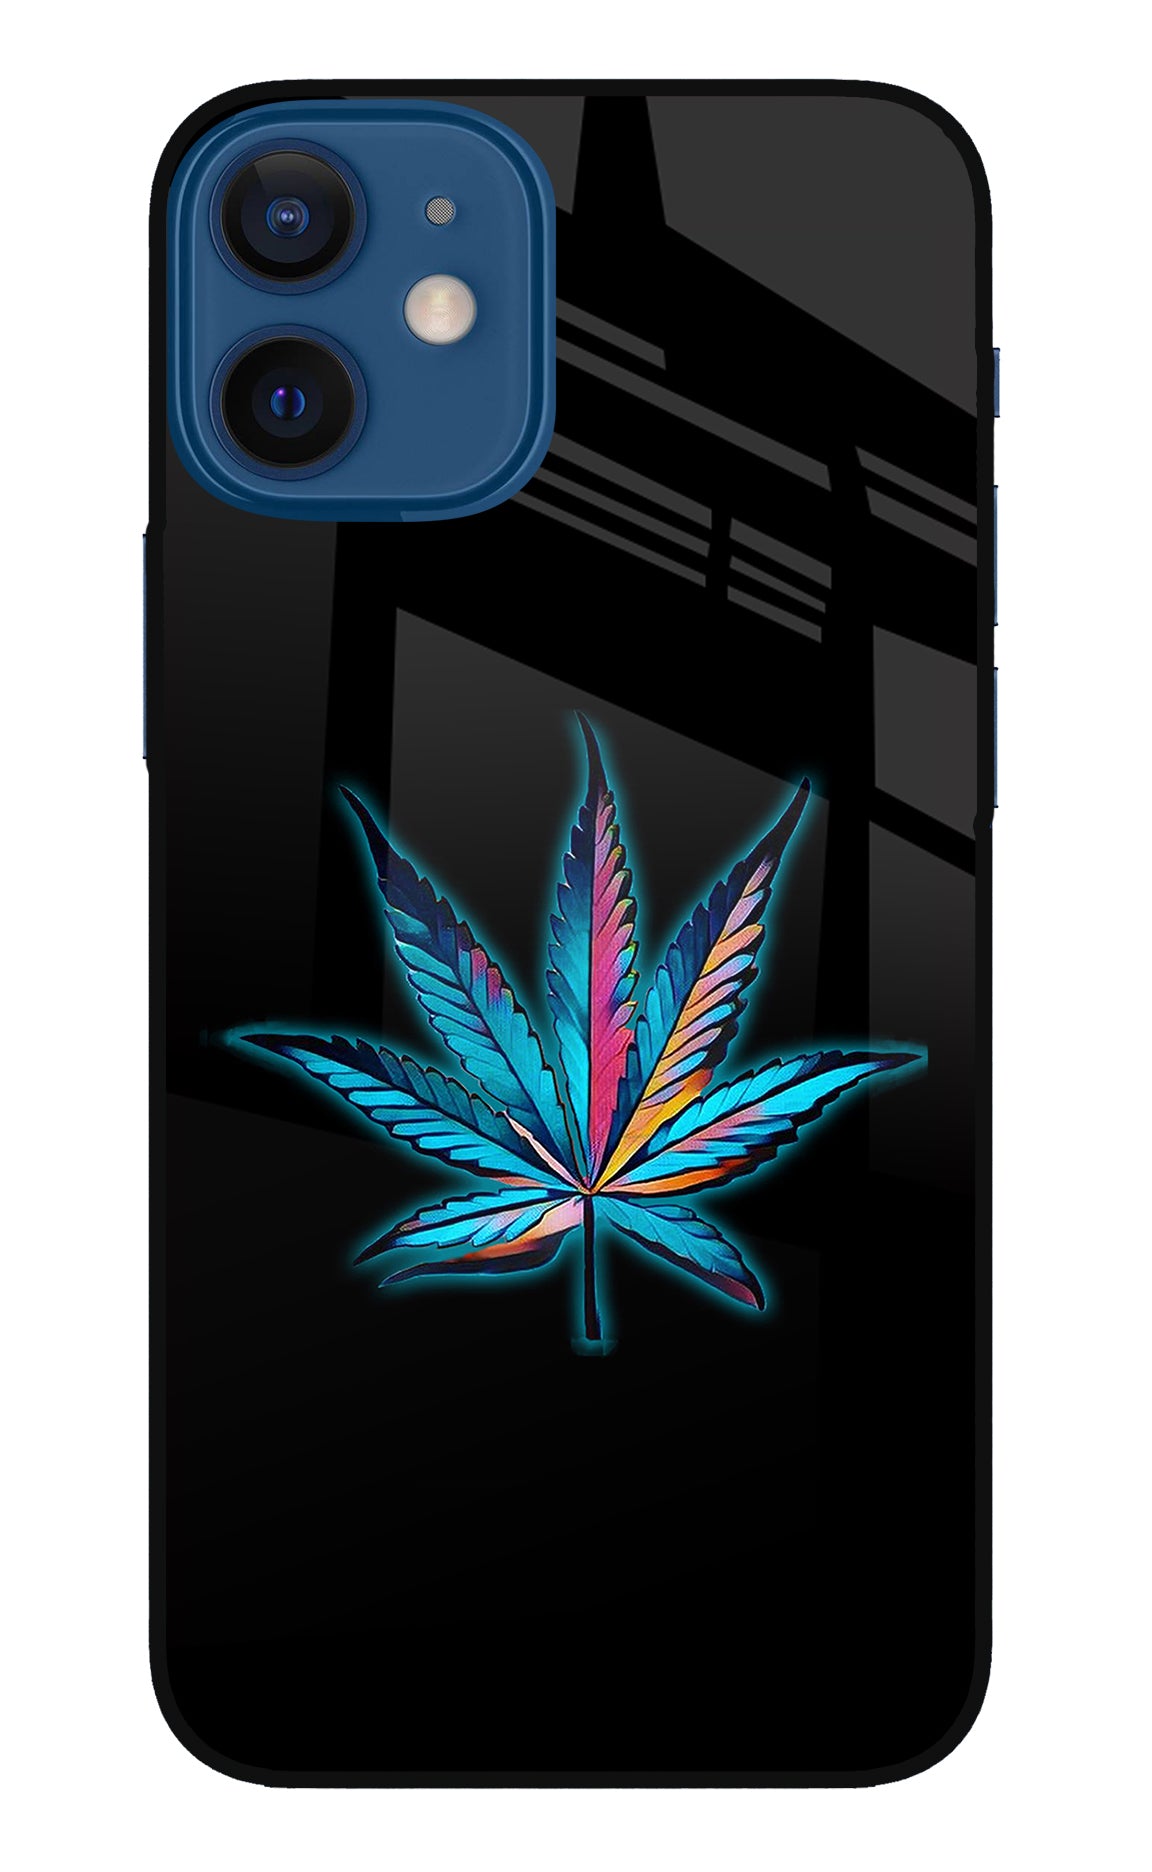 Weed iPhone 12 Mini Back Cover